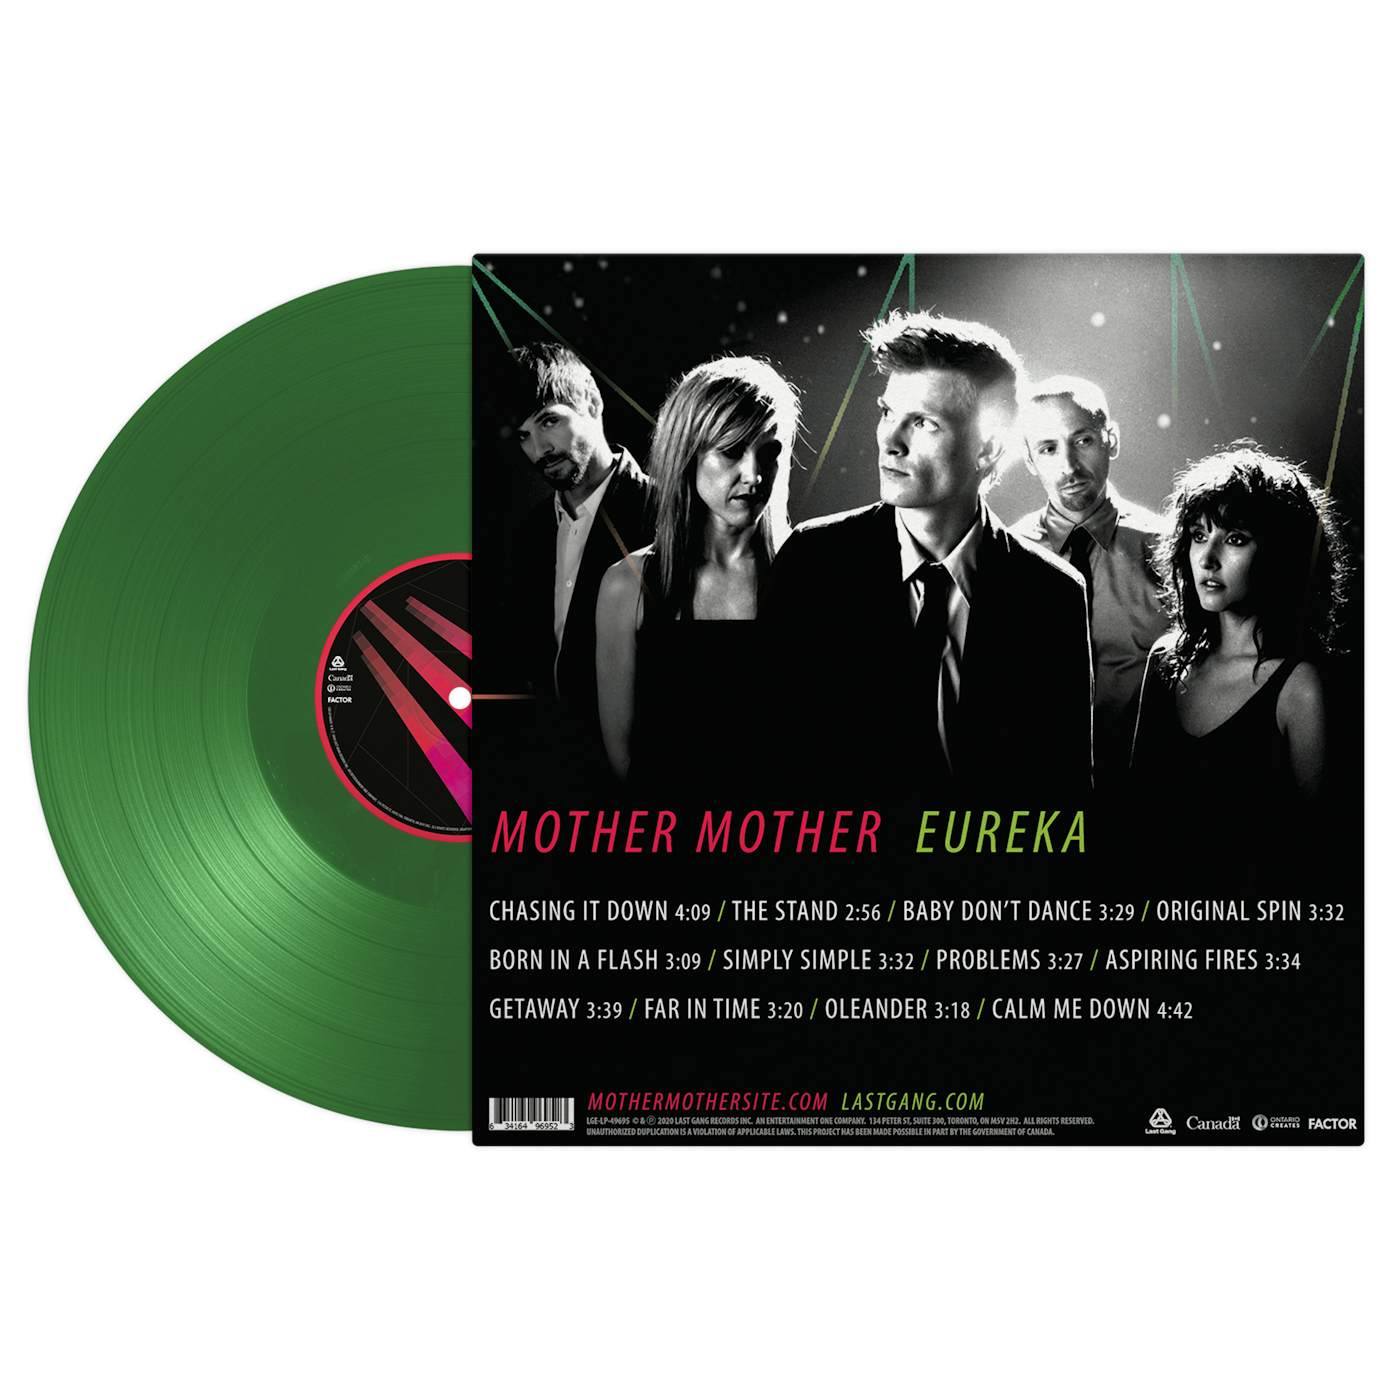 Mother Mother O My Heart Vinyl Record